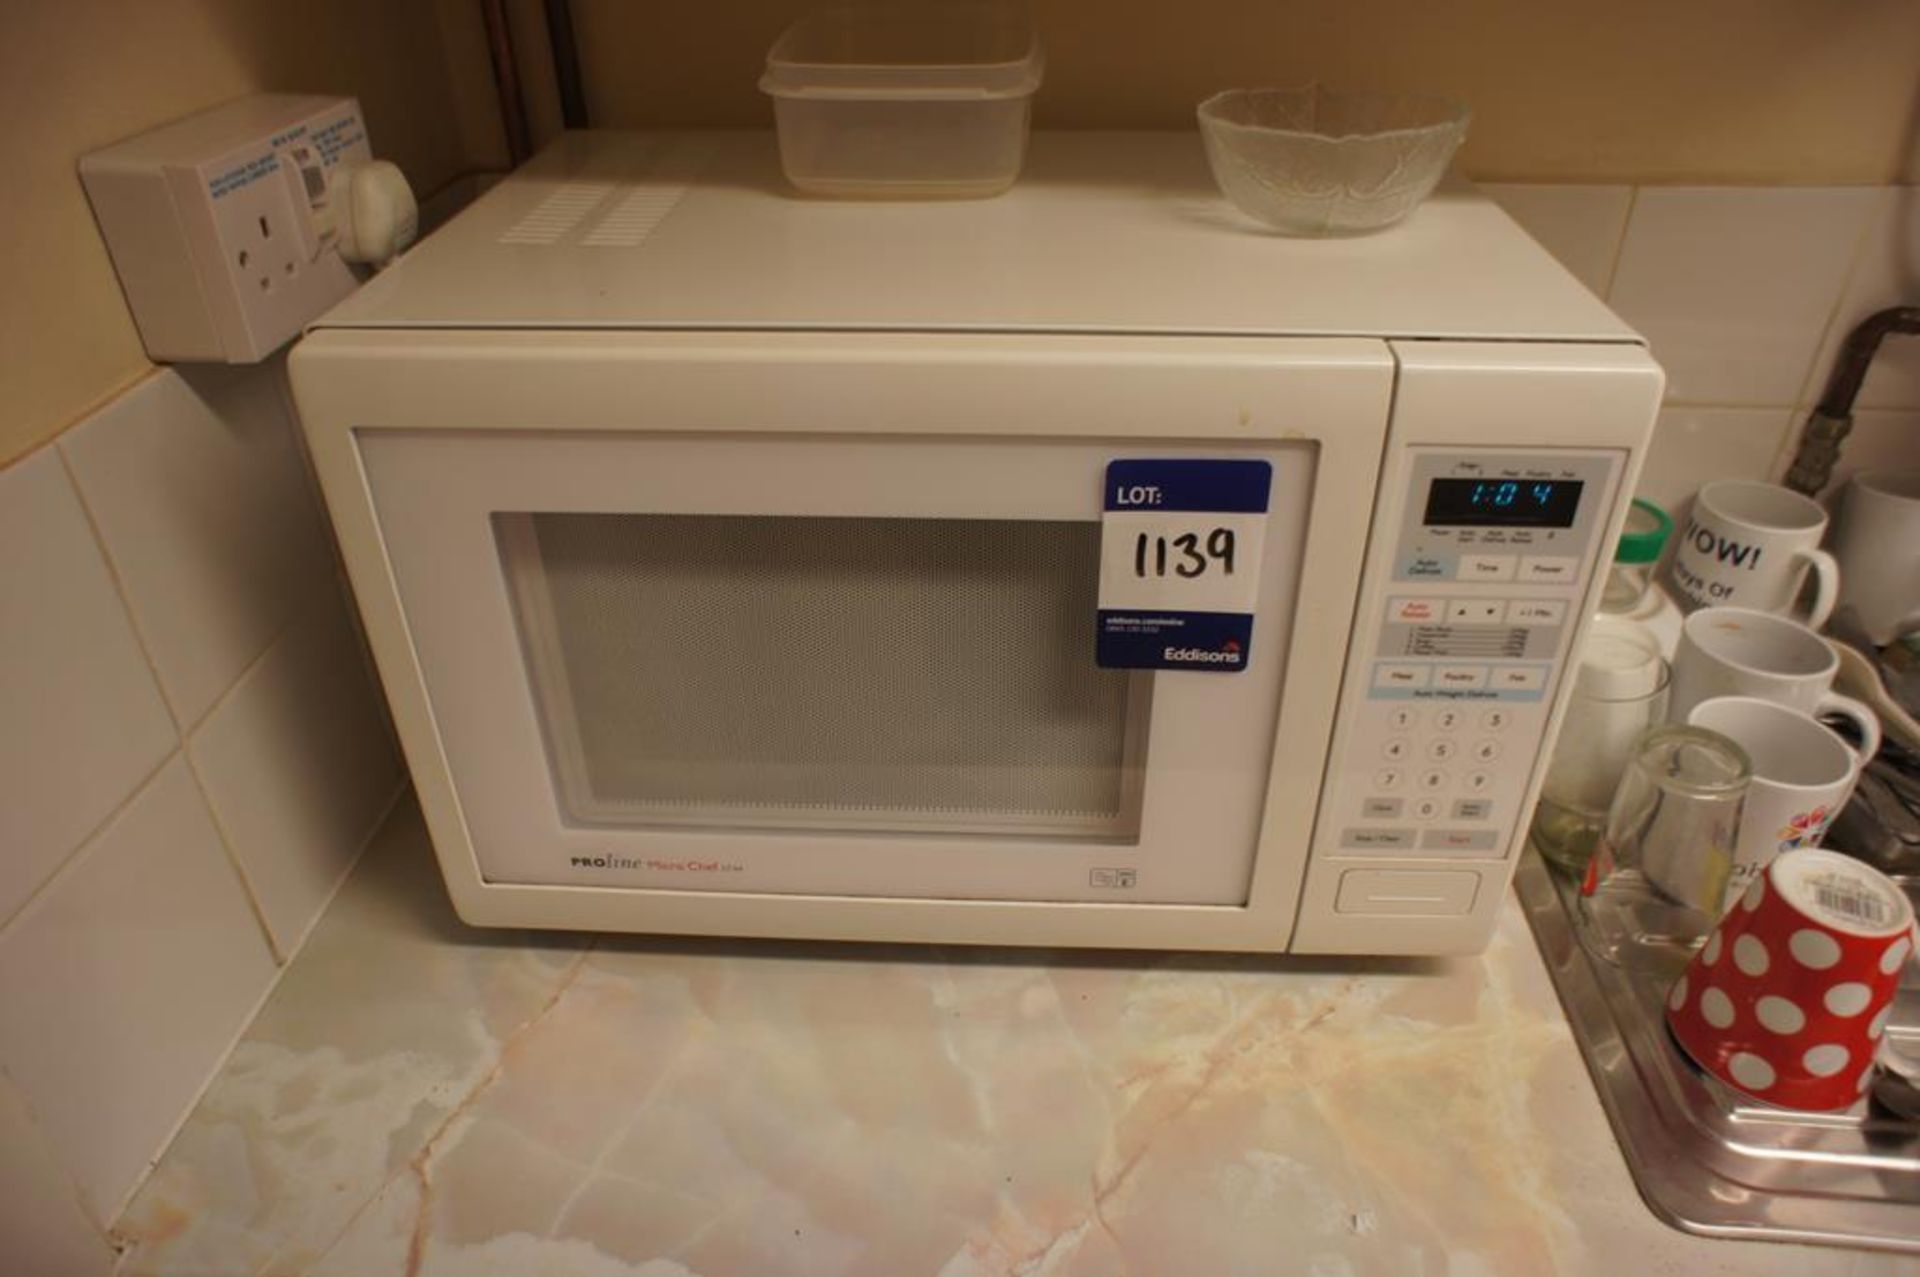 * Proline Microwave Oven Photographs are provided for example purposes only and do not represent the - Image 3 of 3